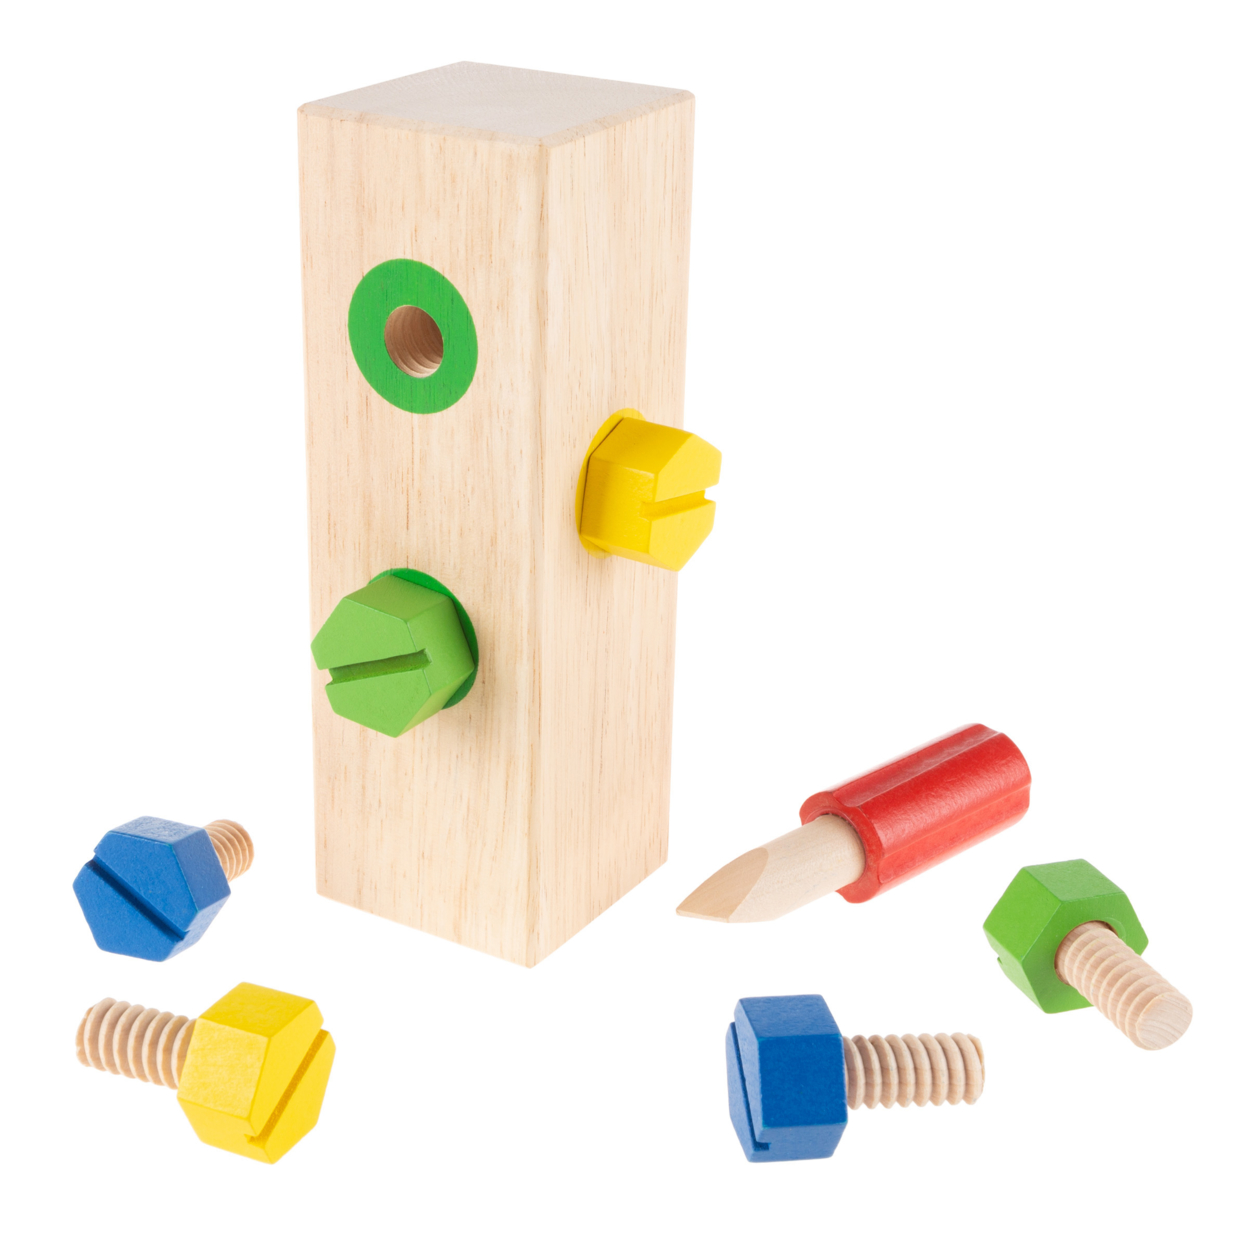 Screw Block Toy- Kids Wooden Screws And Screwdriver-Fun Fine Motor Development Activity For Boys And Girls